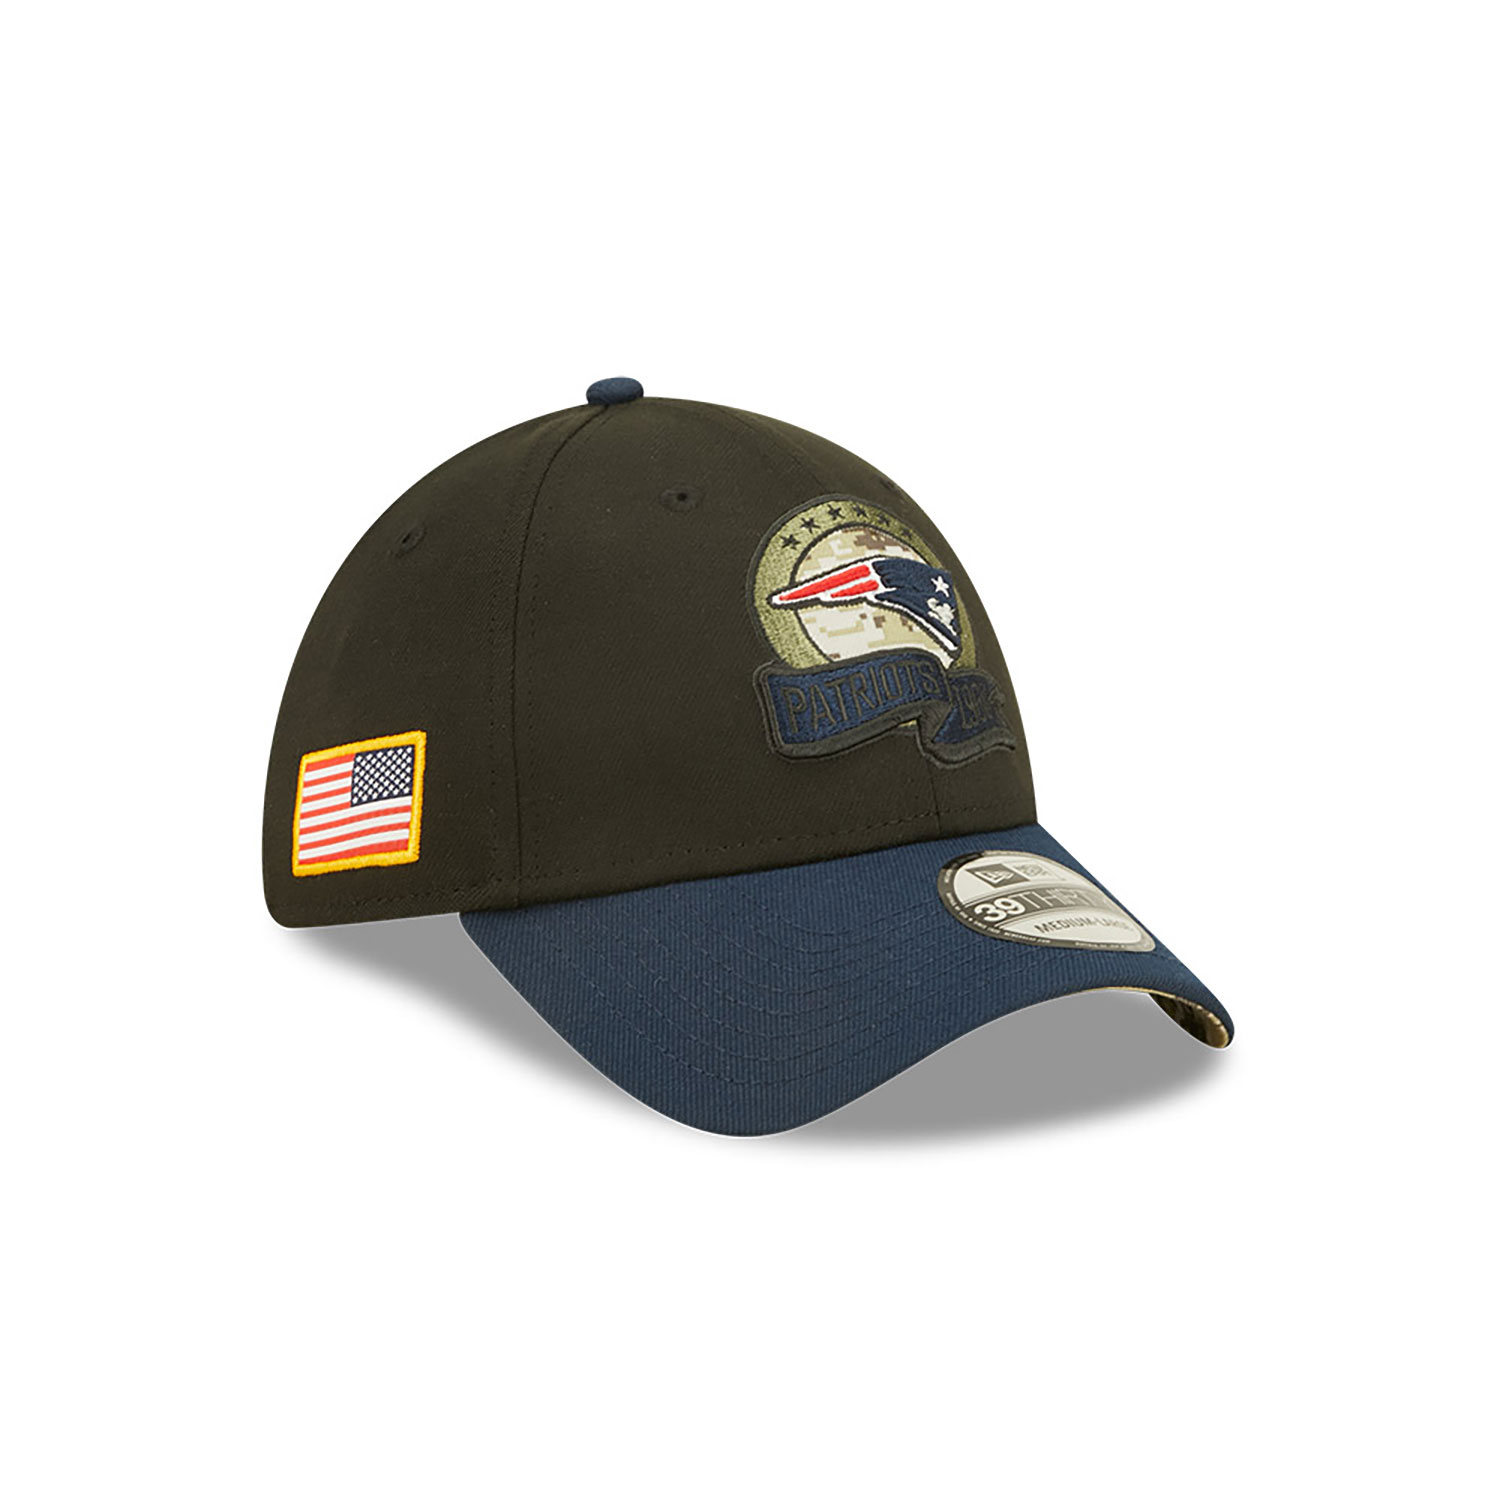 New England Patriots NFL Salute to Service Black 39THIRTY Stretch Fit Cap